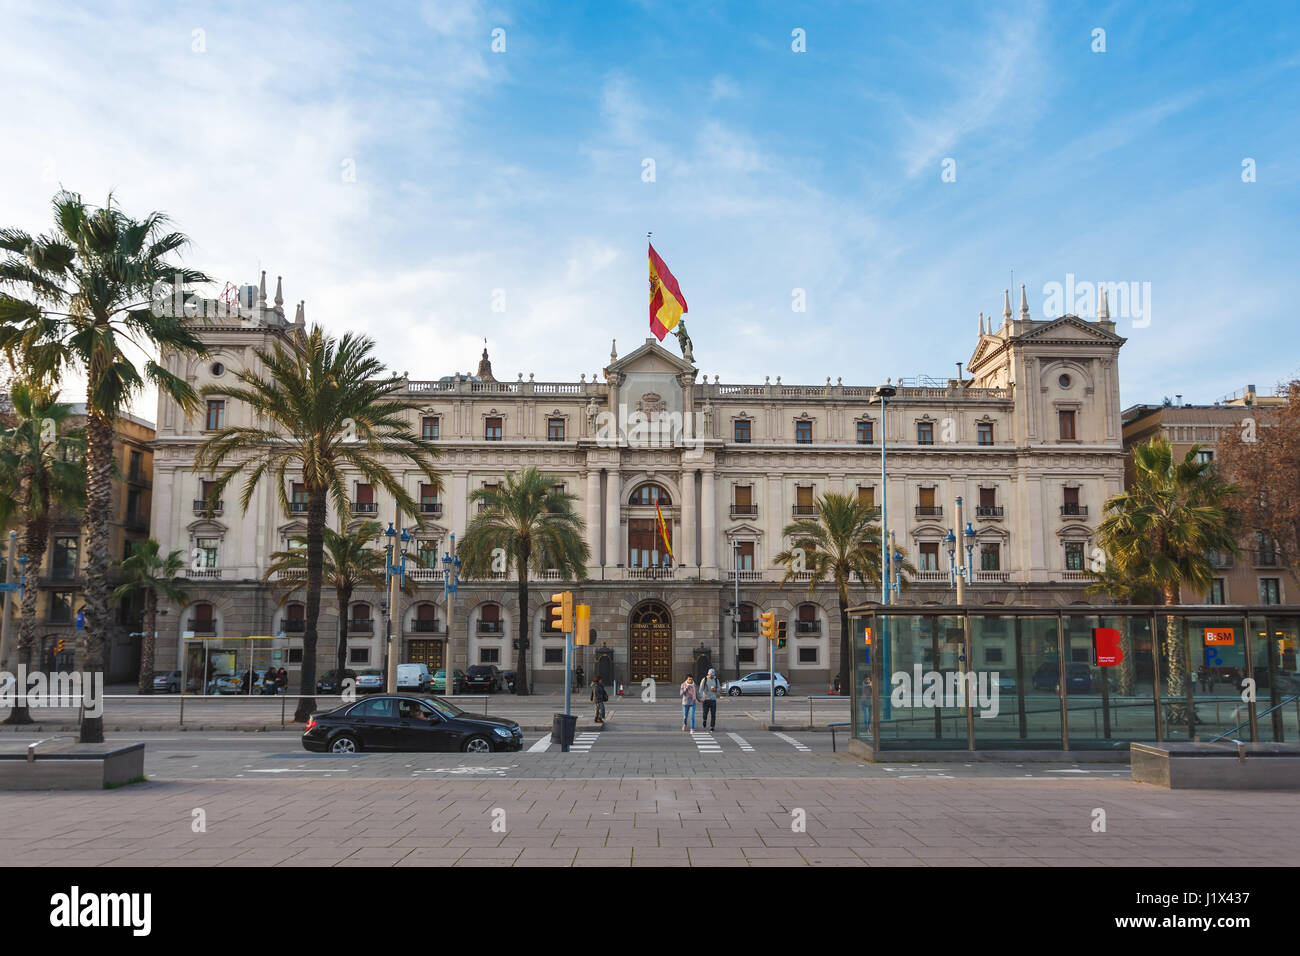 Barcelona, Spain - January 02 2017: View of the Palace of the Army General Inspectorate, located on the Passeig de Colom street in Barcelona Stock Photo